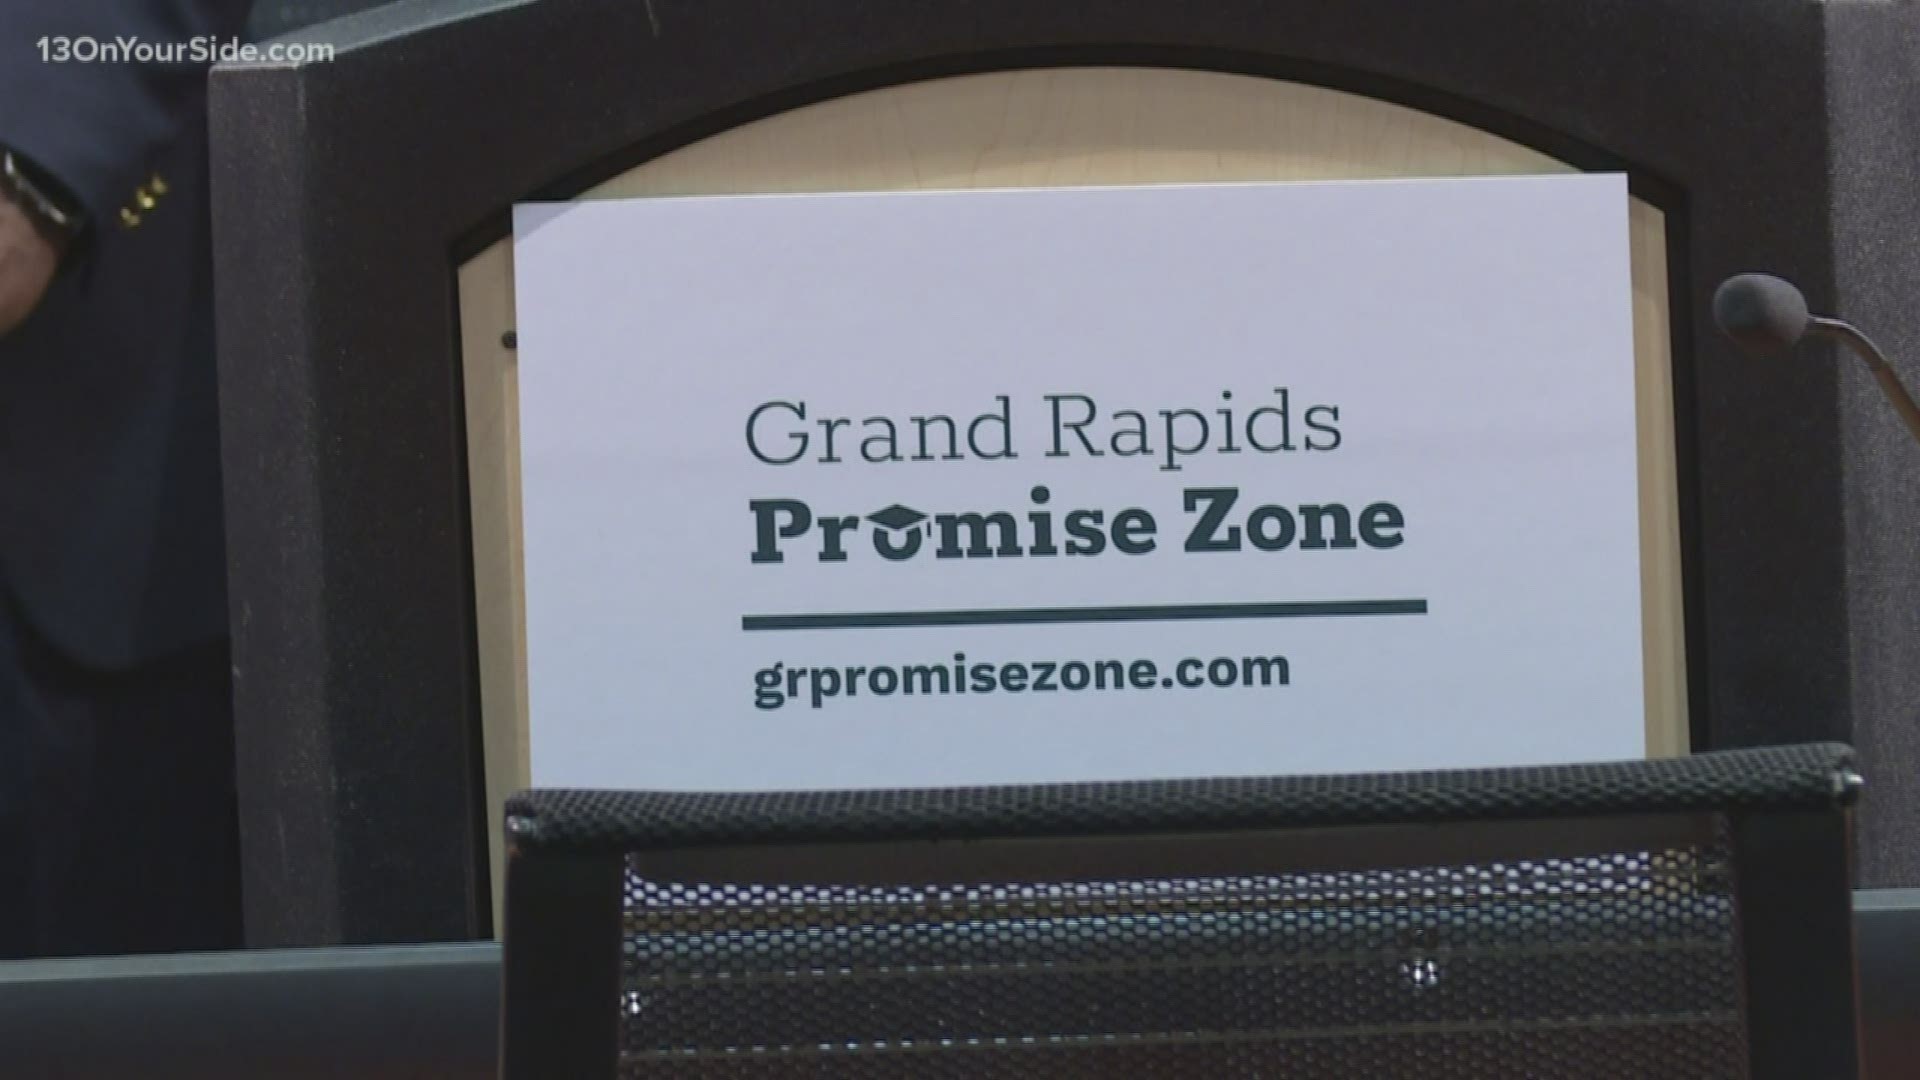 The Grand Rapids Promise Zone was announced Monday.